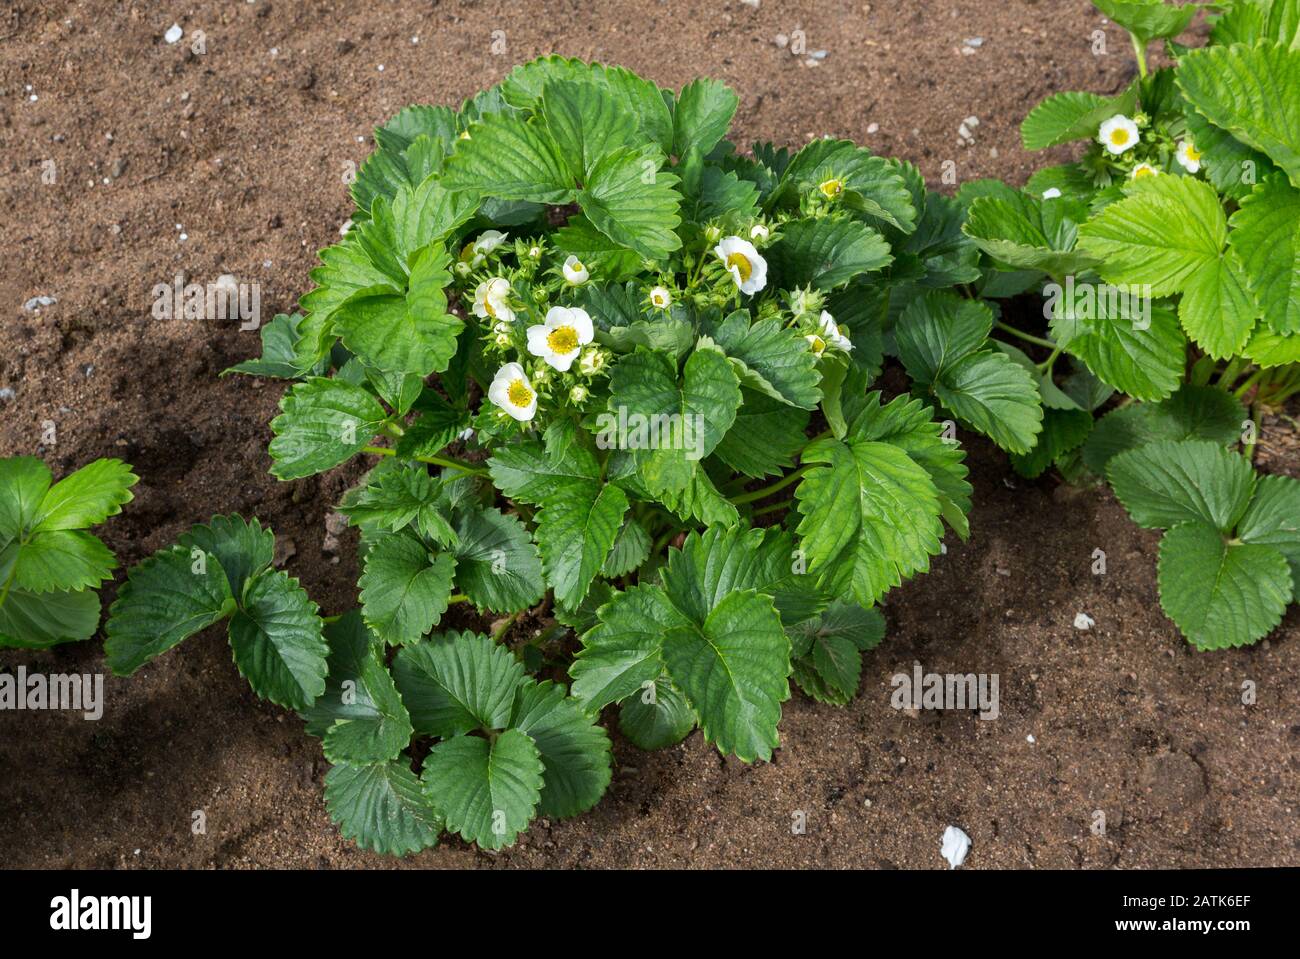 Strawberry plant. Blossoming  of  strawberry.  Wild stawberry bushes.  Strawberries in growth at garden. Stock Photo